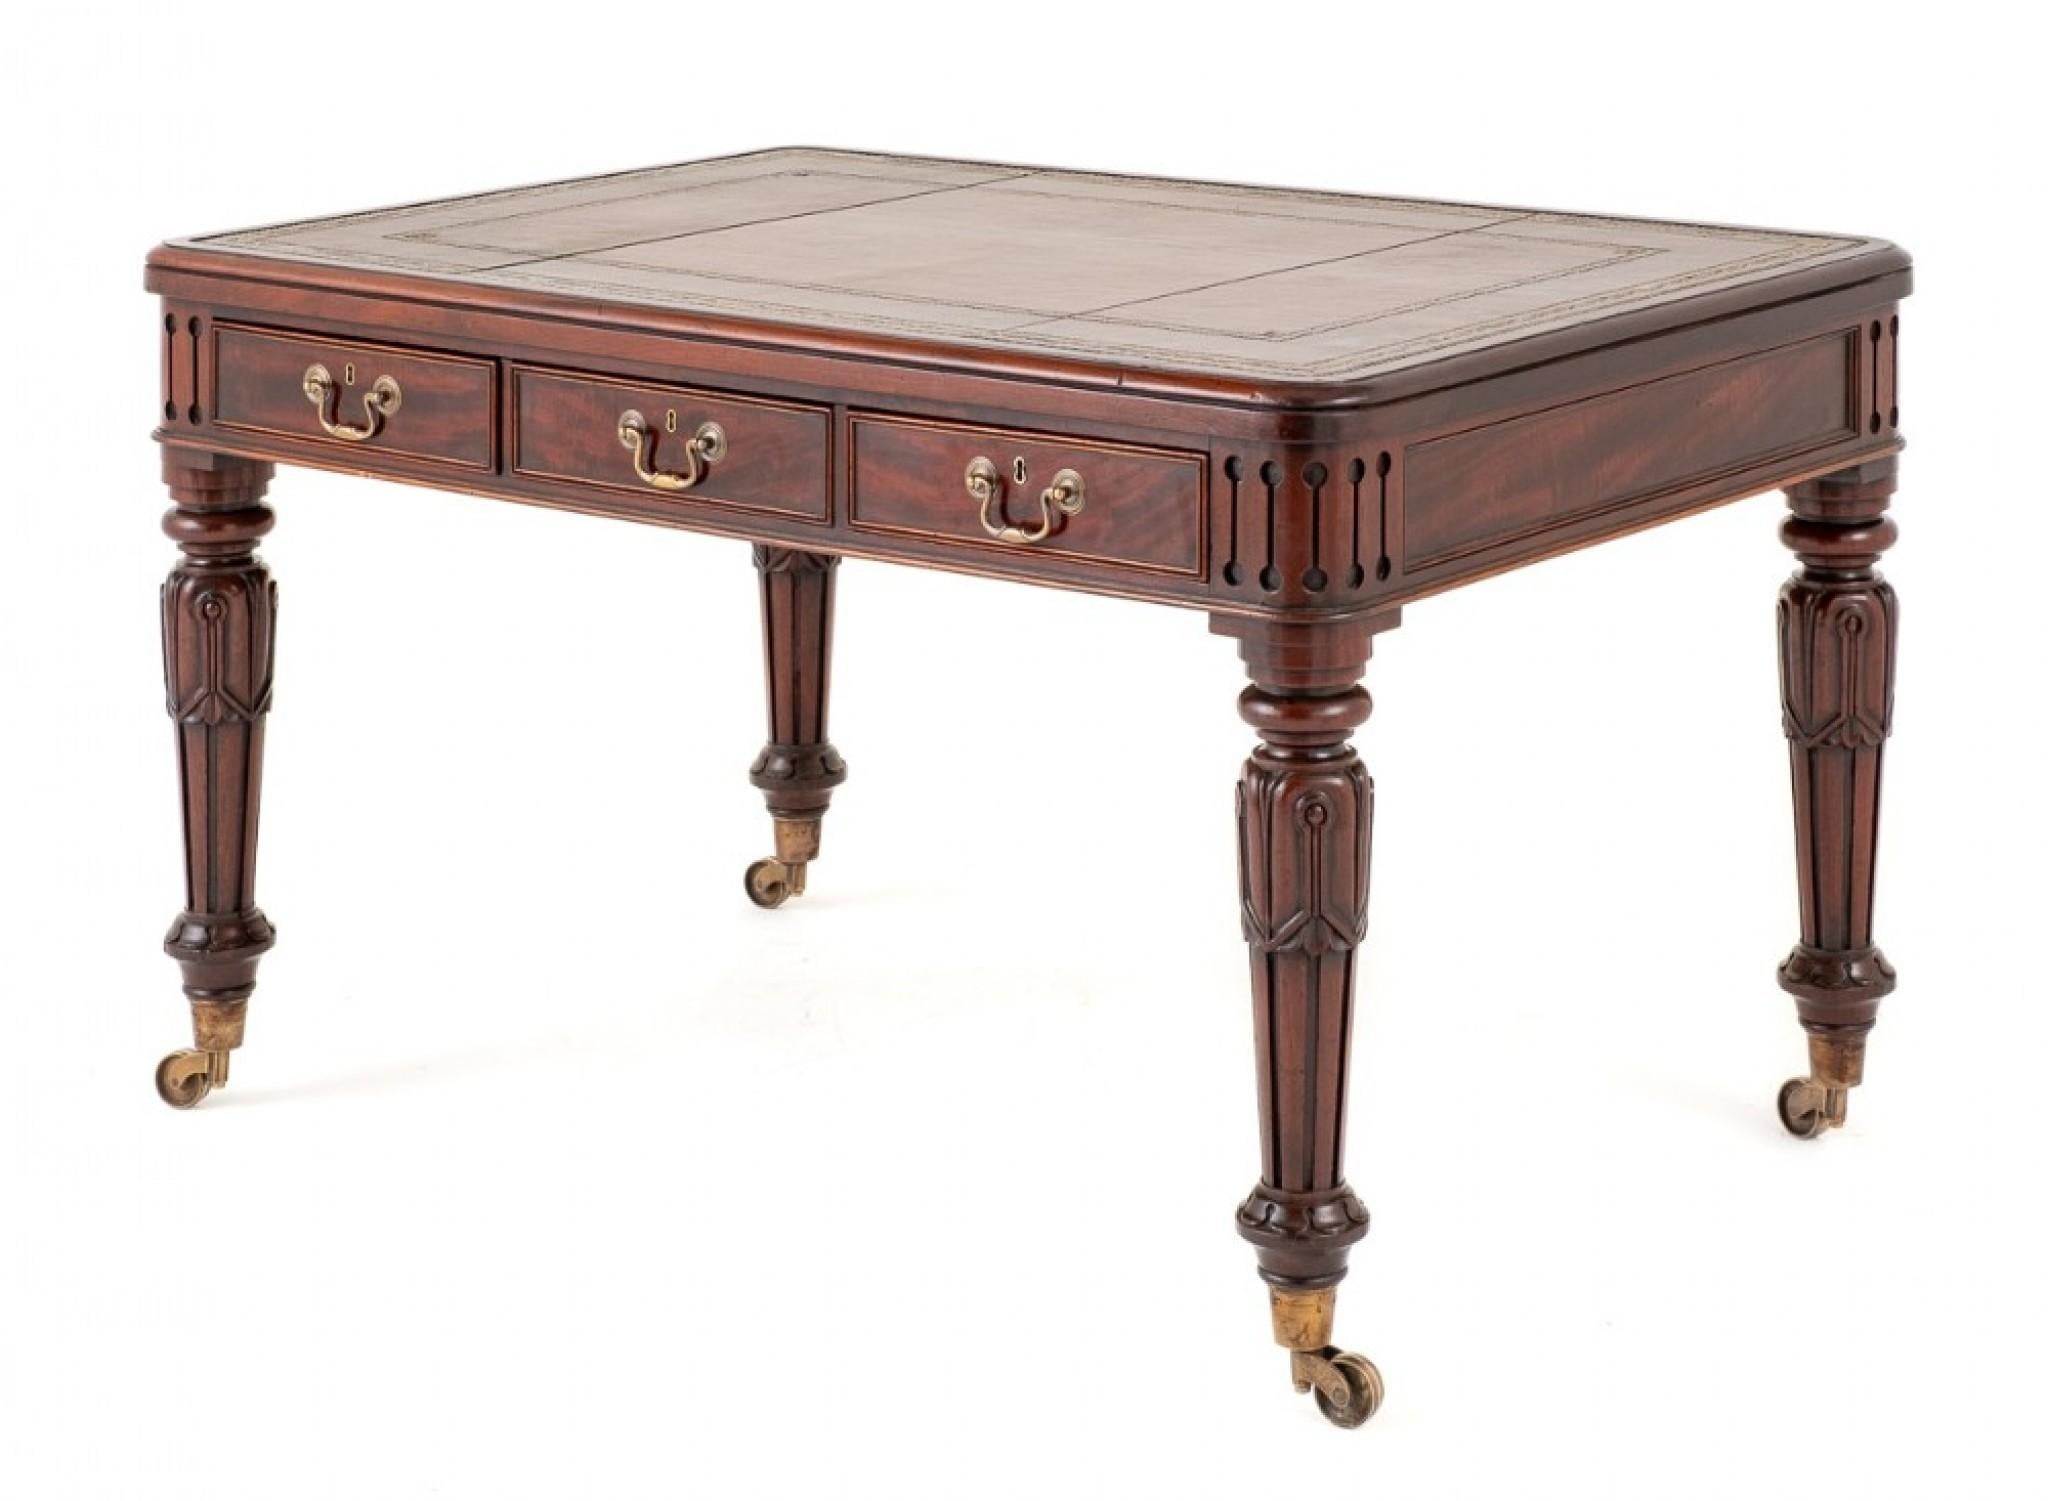 Impressive Regency Mahogany Library Table.
Period Regency
This Table is Raised upon Impressive Ring Turned, Fluted and Carved Legs with Brass Castors.
Featuring 6 x Mahogany Lined Working Drawers which have Brass Swan Neck Handles.
The Top of the